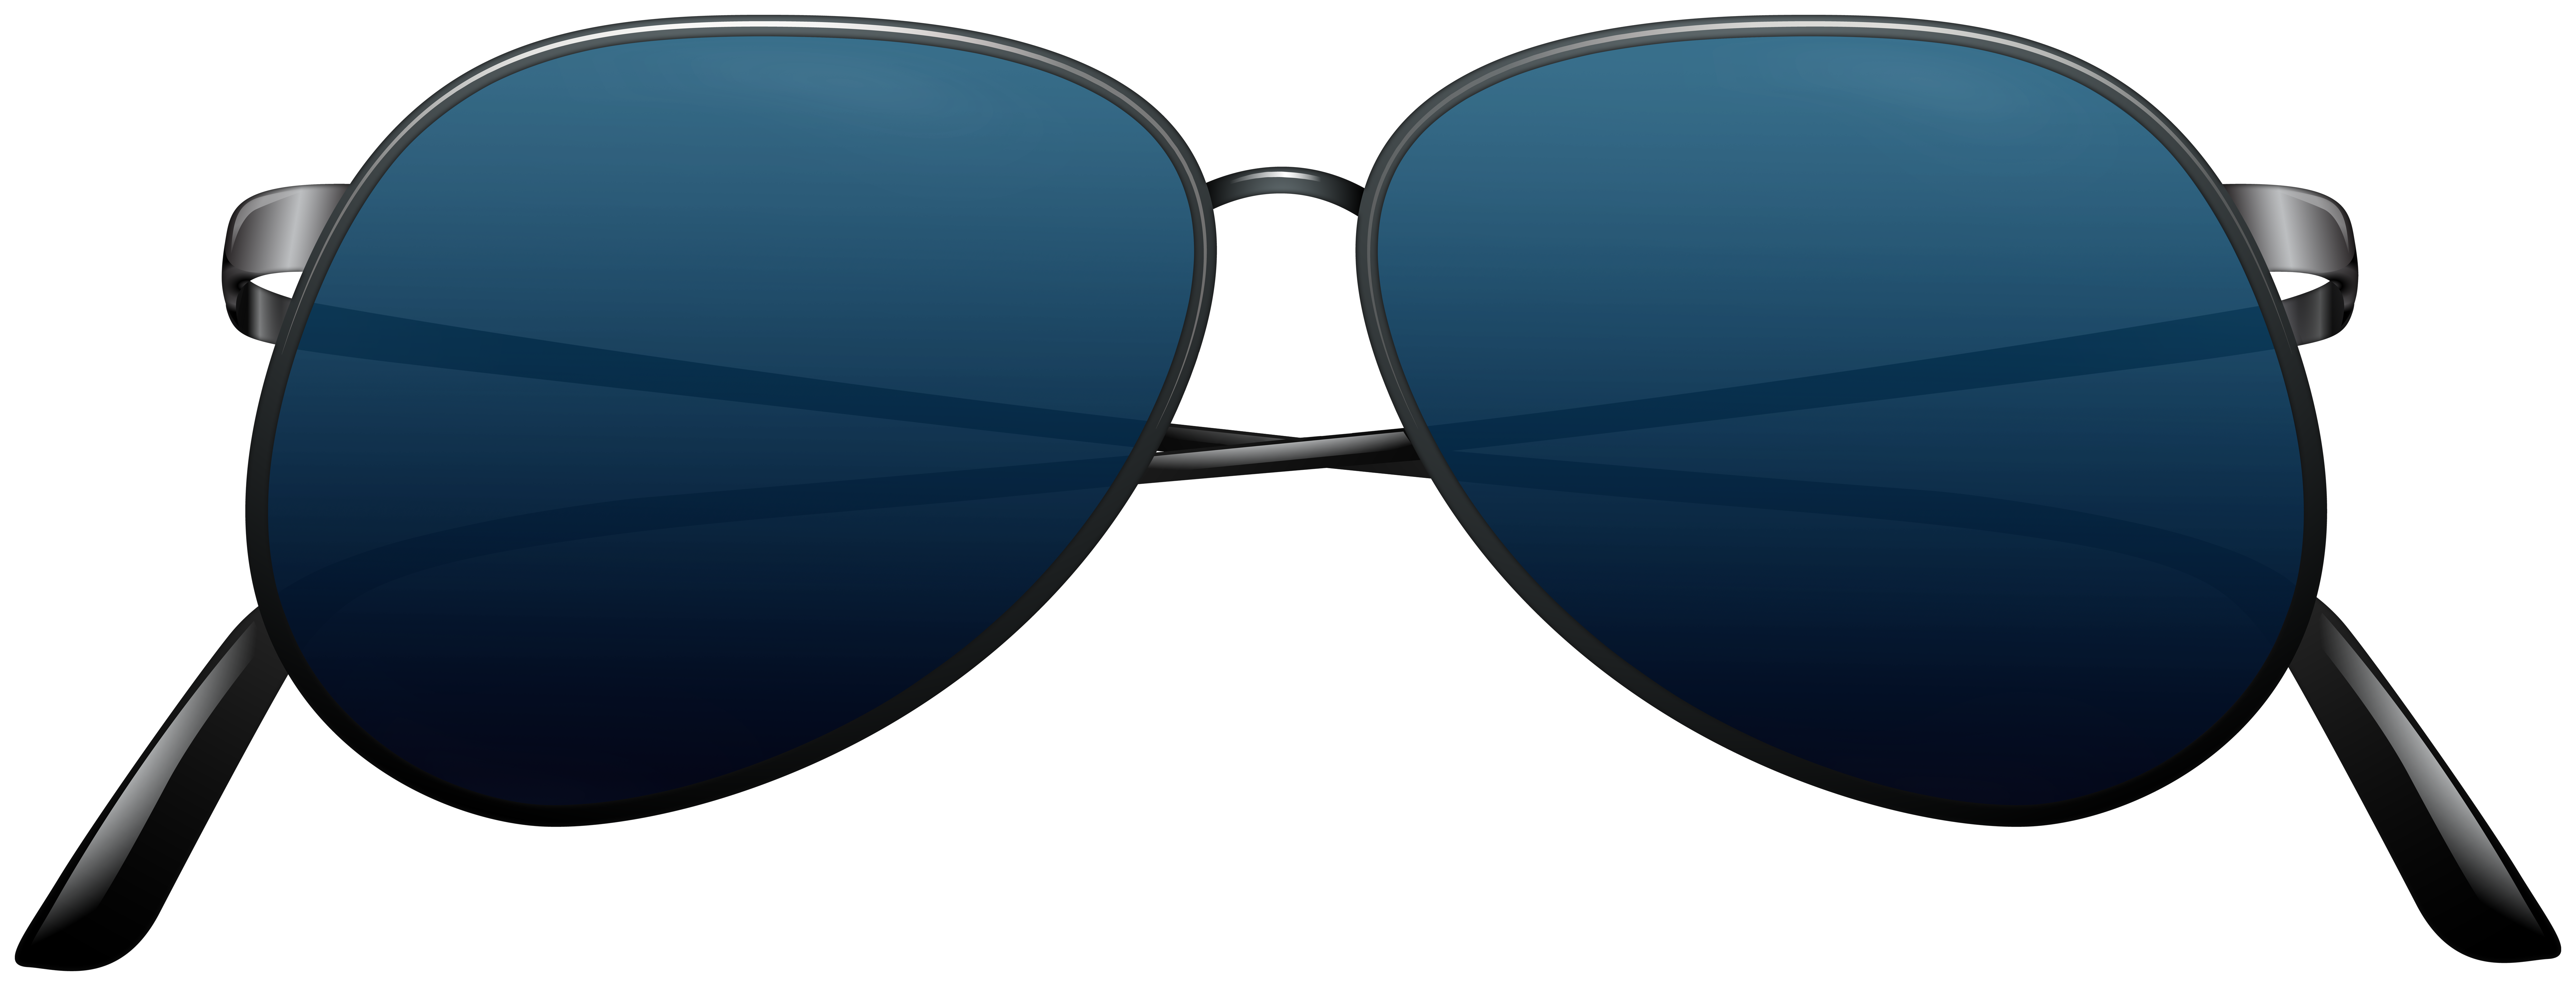 2,657 Cool Sunglasses Clipart Royalty-Free Photos and Stock Images |  Shutterstock